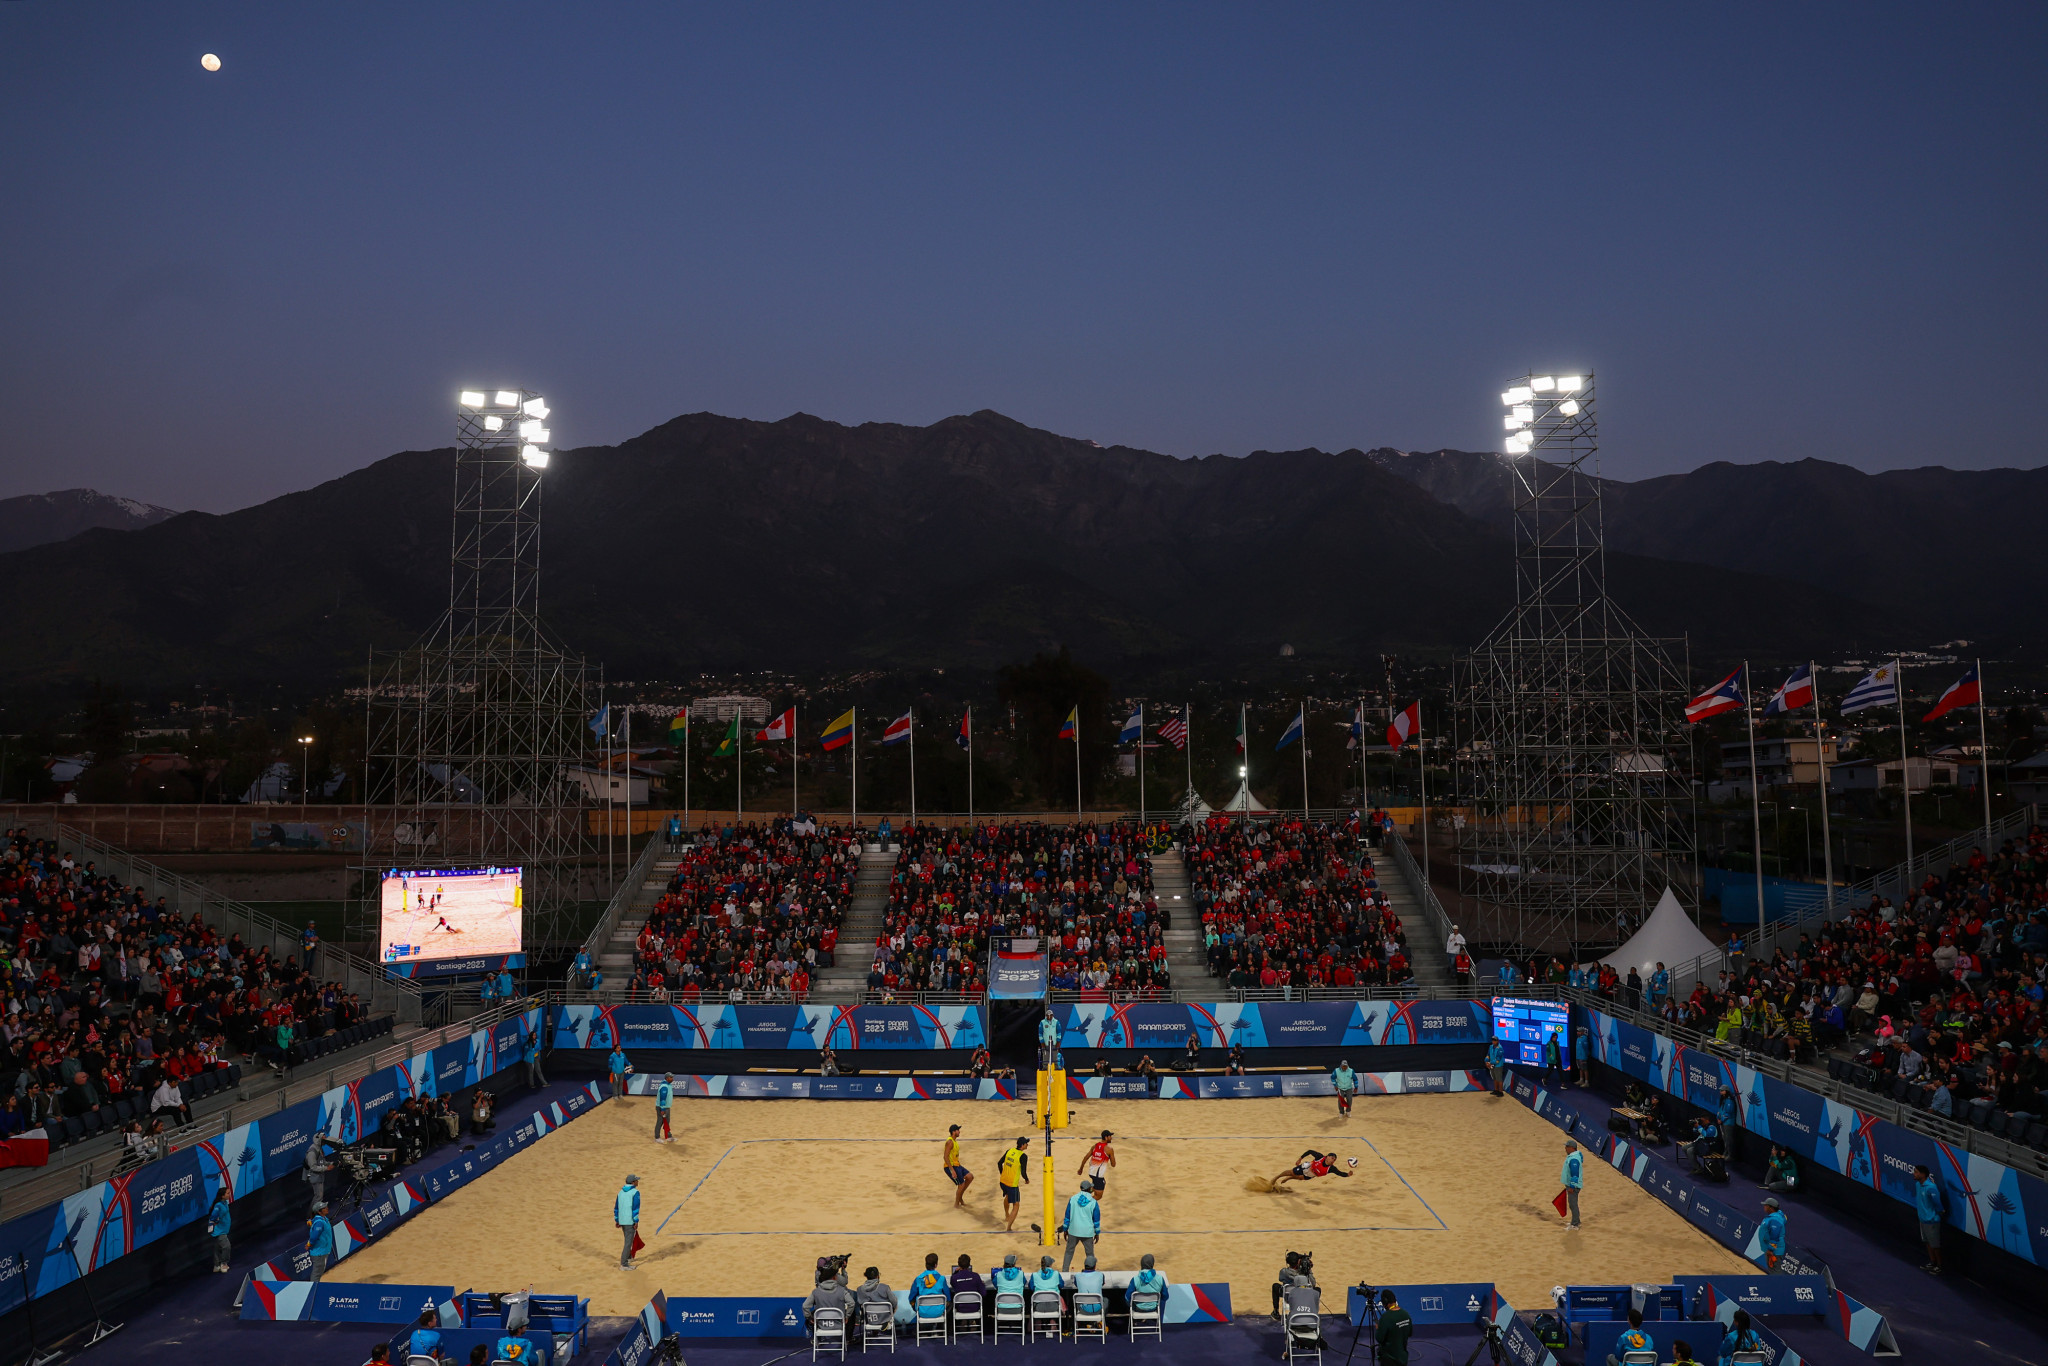 The facilities and atmosphere at Santiago 2023 seems to be impressing everyone who experiences it ©Getty Images